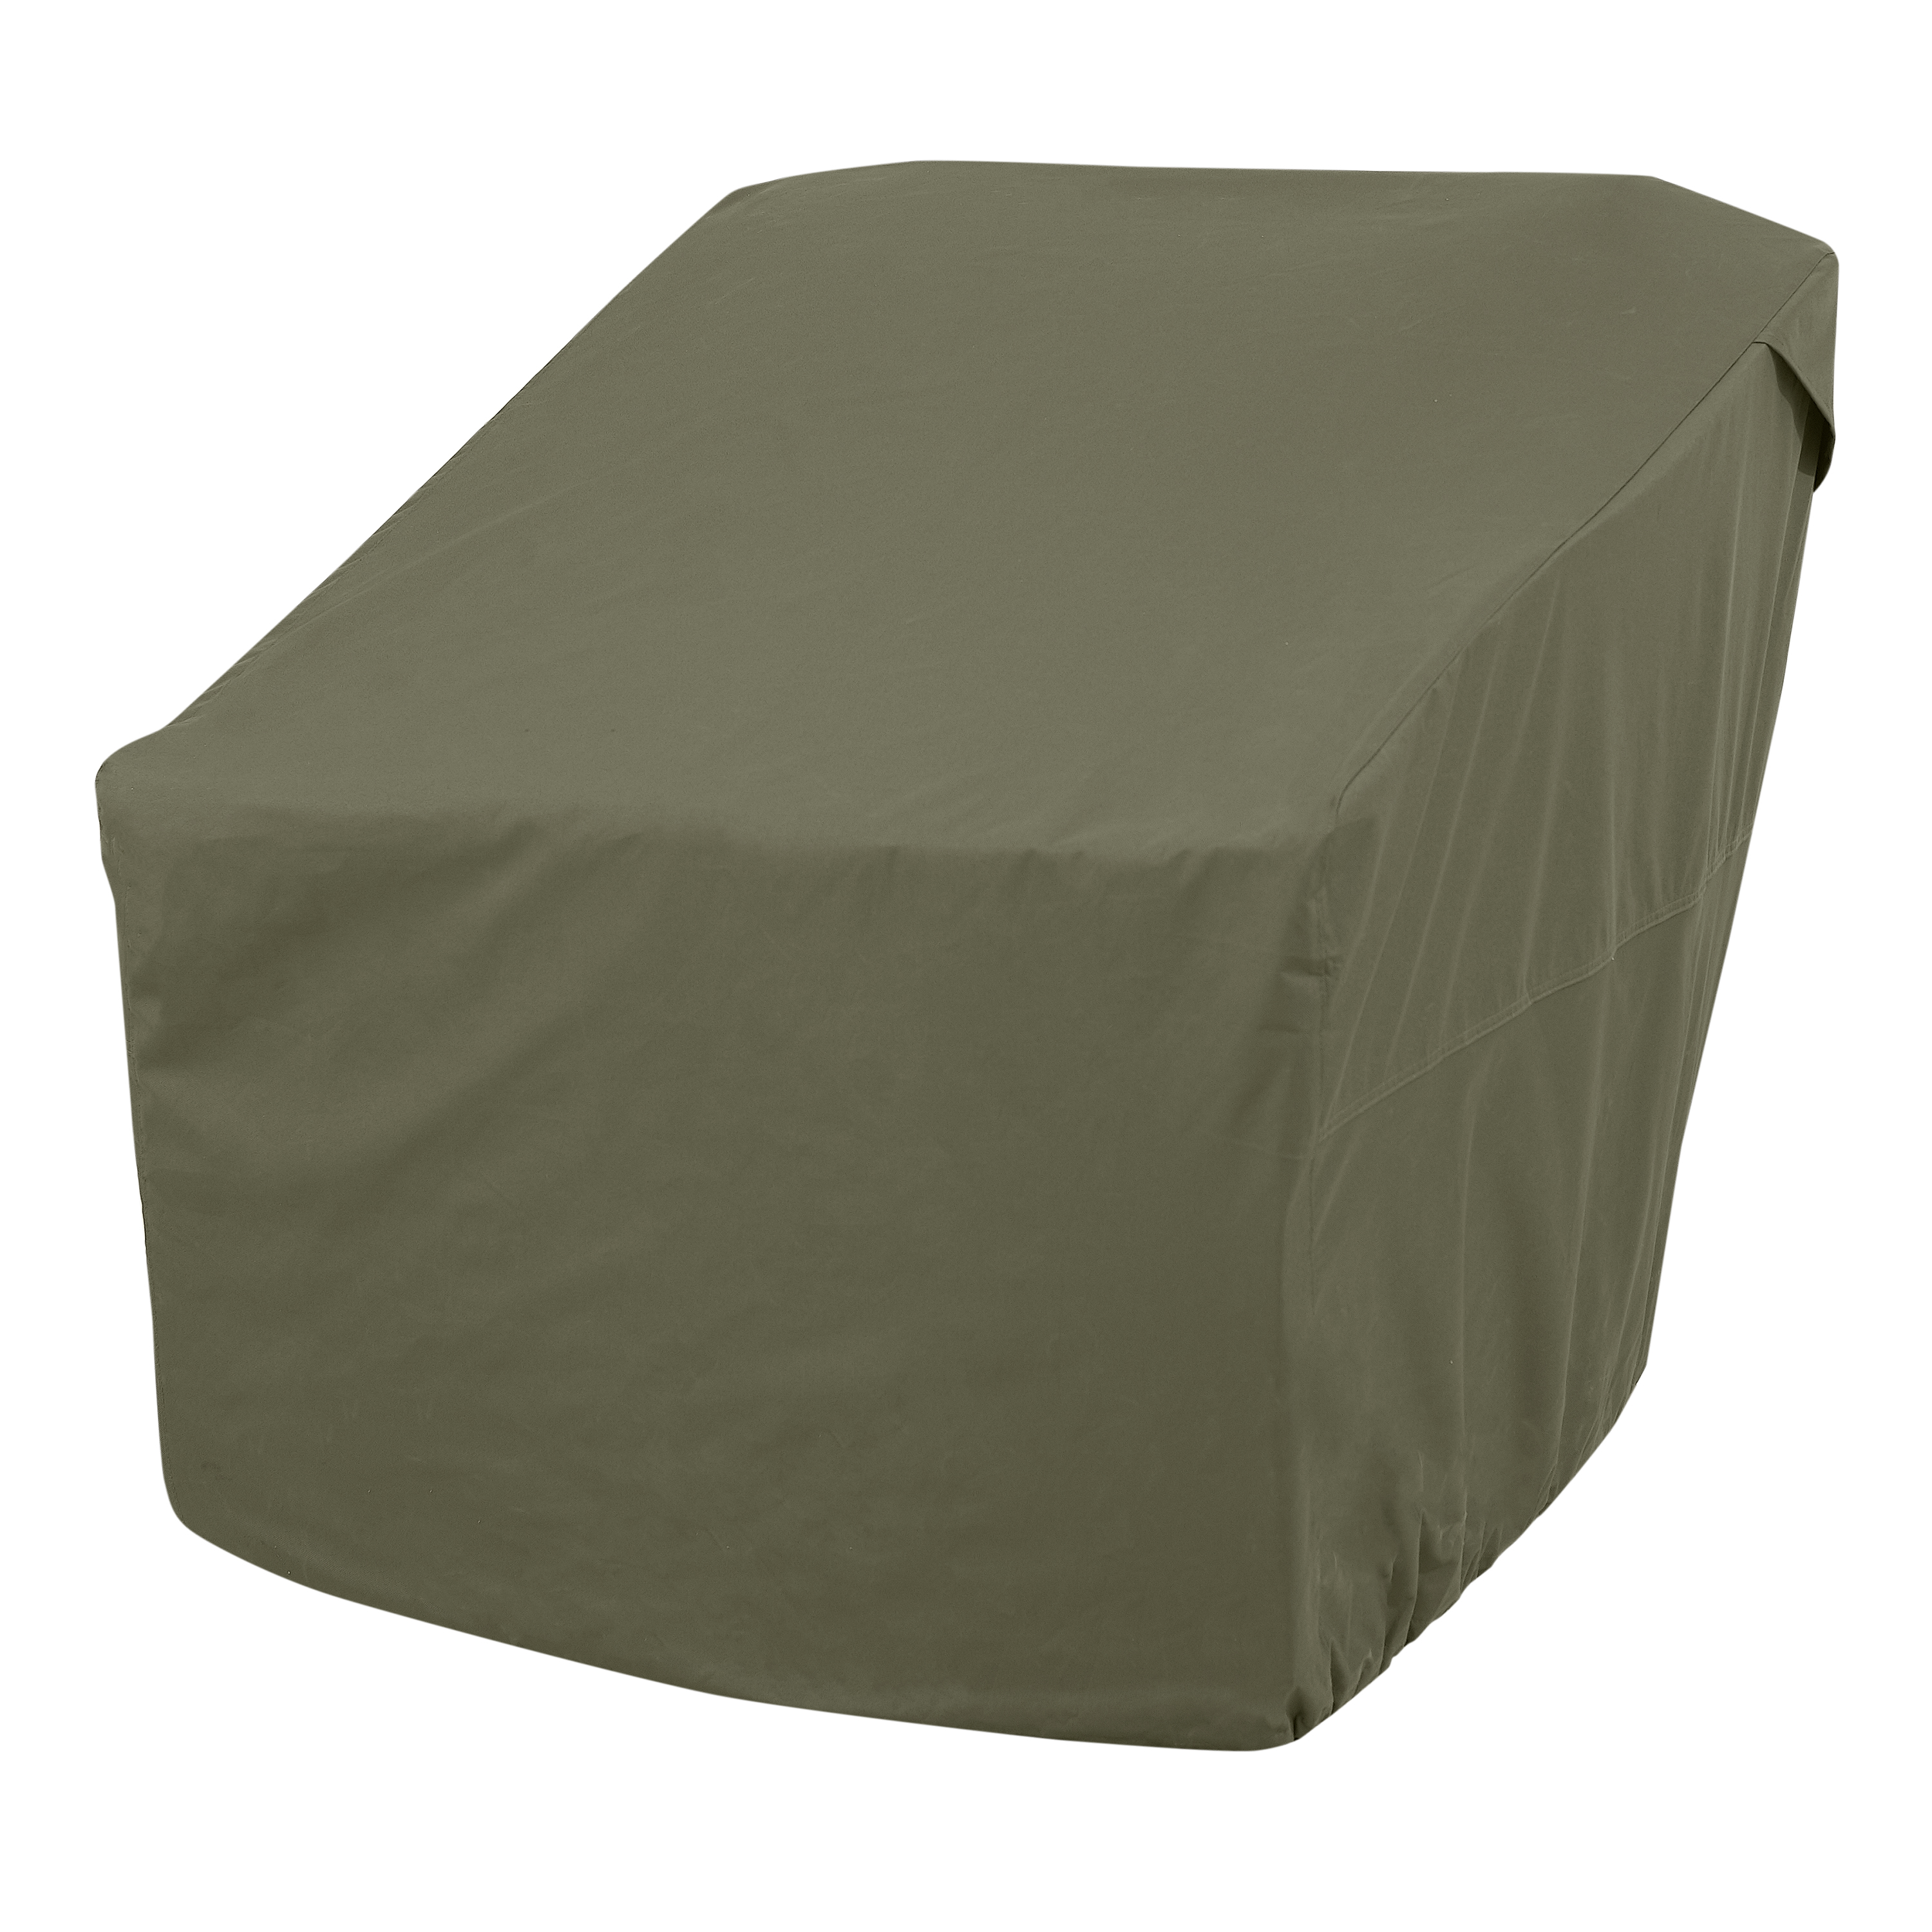 Better Homes & Gardens 33.5" x 31.5" x 36" Olive Gray Rectangle Patio Chair Cover - image 1 of 5